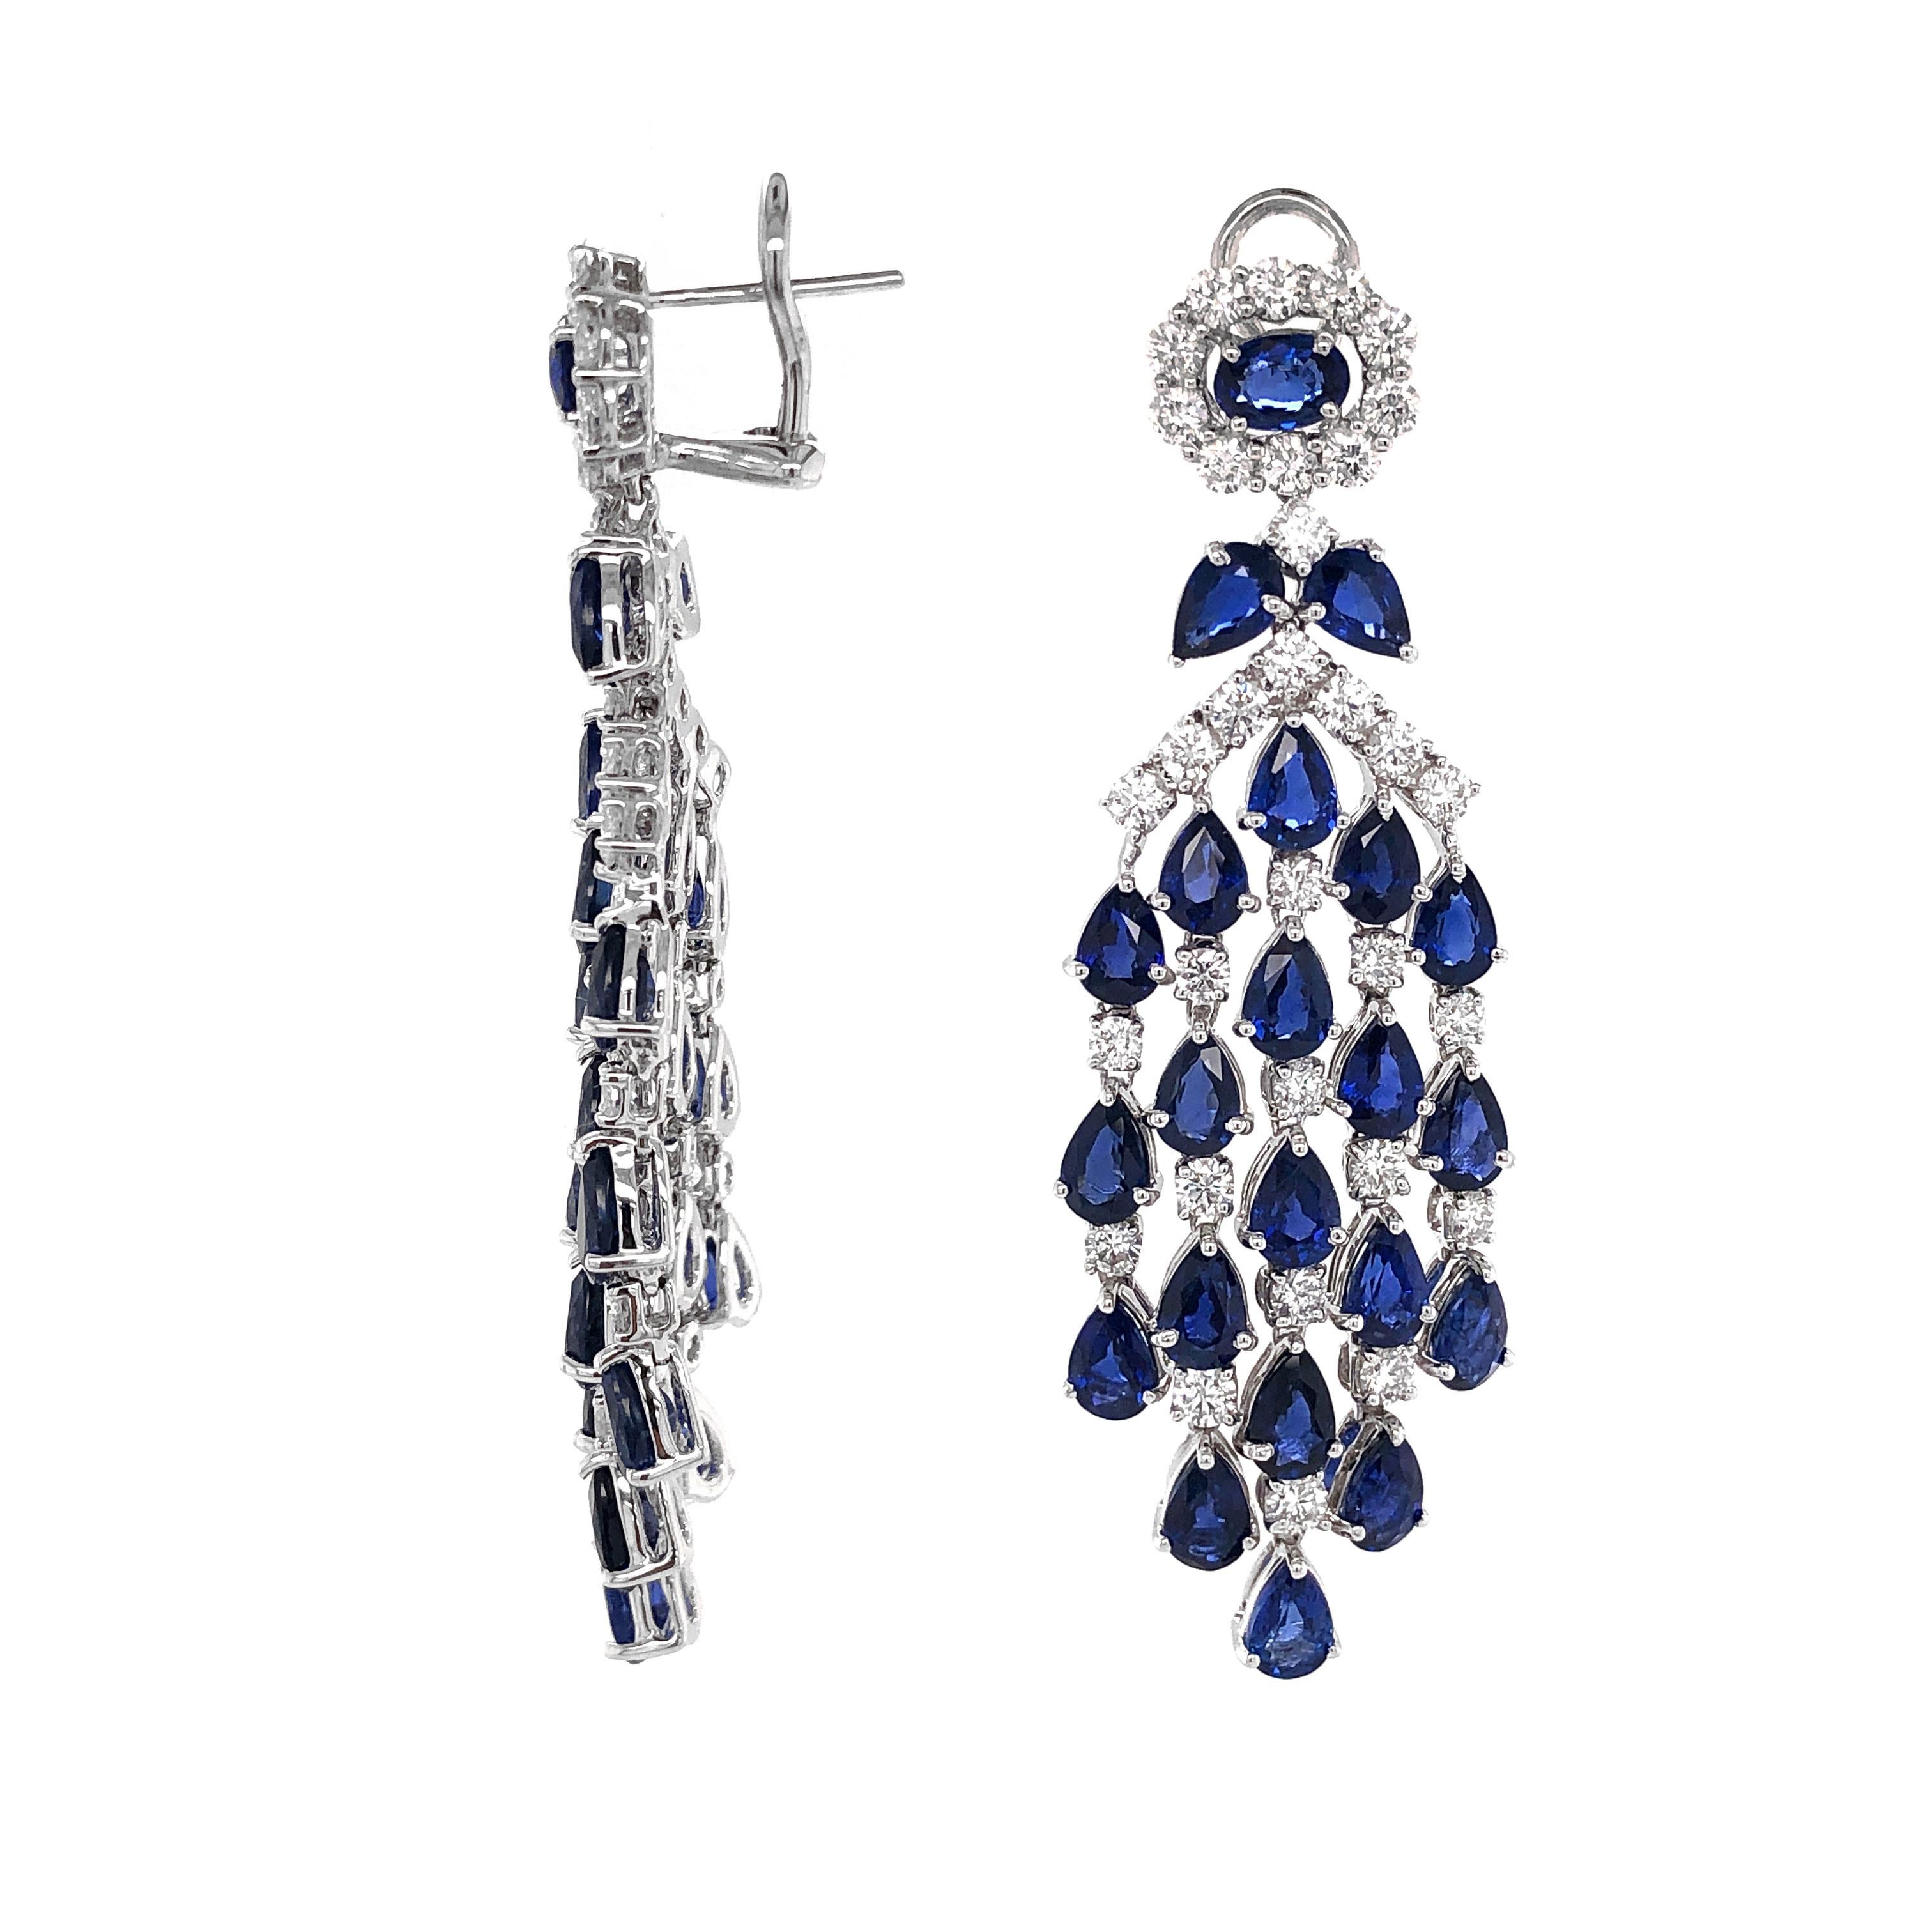 Dangling platinum earrings with pear and oval cut Ceylon sapphires 22.84 ct.
Accent of small round white diamonds 4.69 ct.
Diamonds are natural and in G-H Color Clarity VS.
Platinum 950 Metal. 
Omega / French clips.
Width: 2.1 cm
Height: 6.5